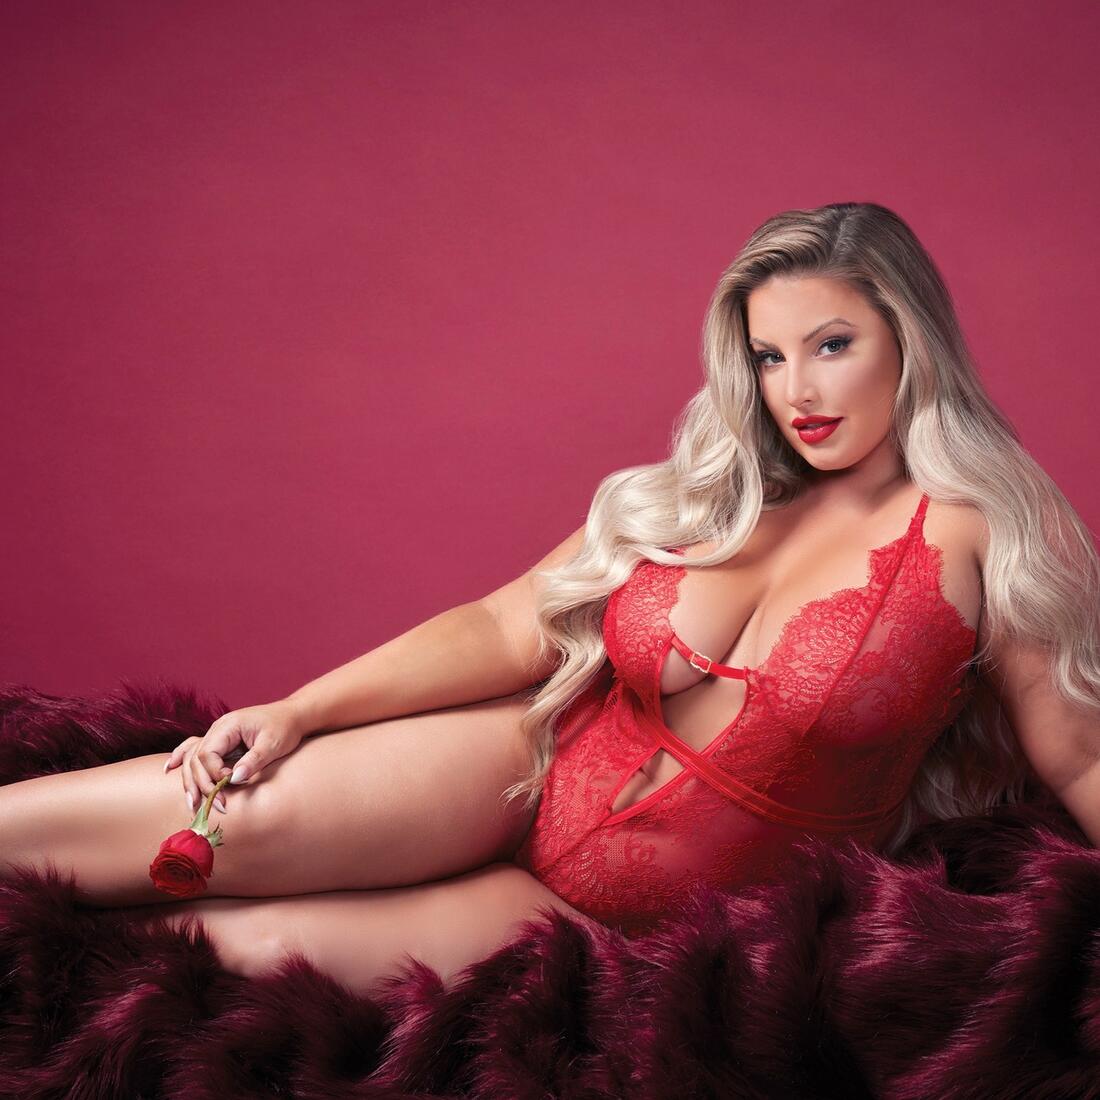 Ashley alexiss height and weight 👉 👌 Plus size models (Ashle